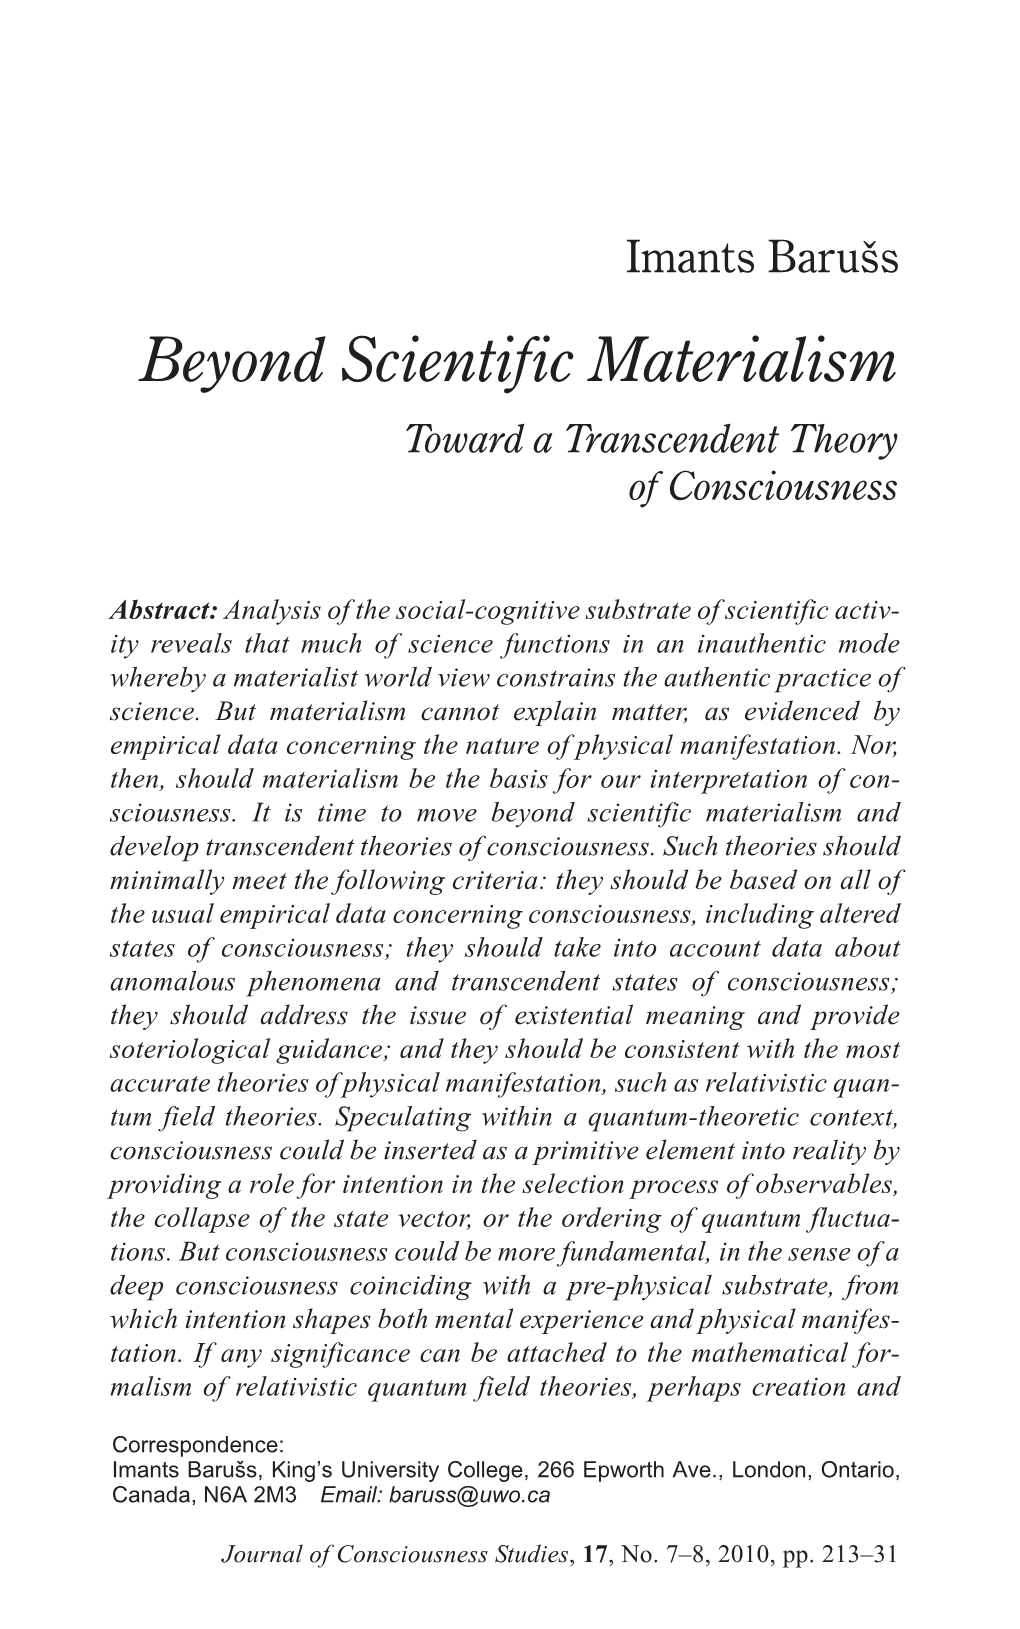 Beyond Scientific Materialism Toward a Transcendent Theory of Consciousness